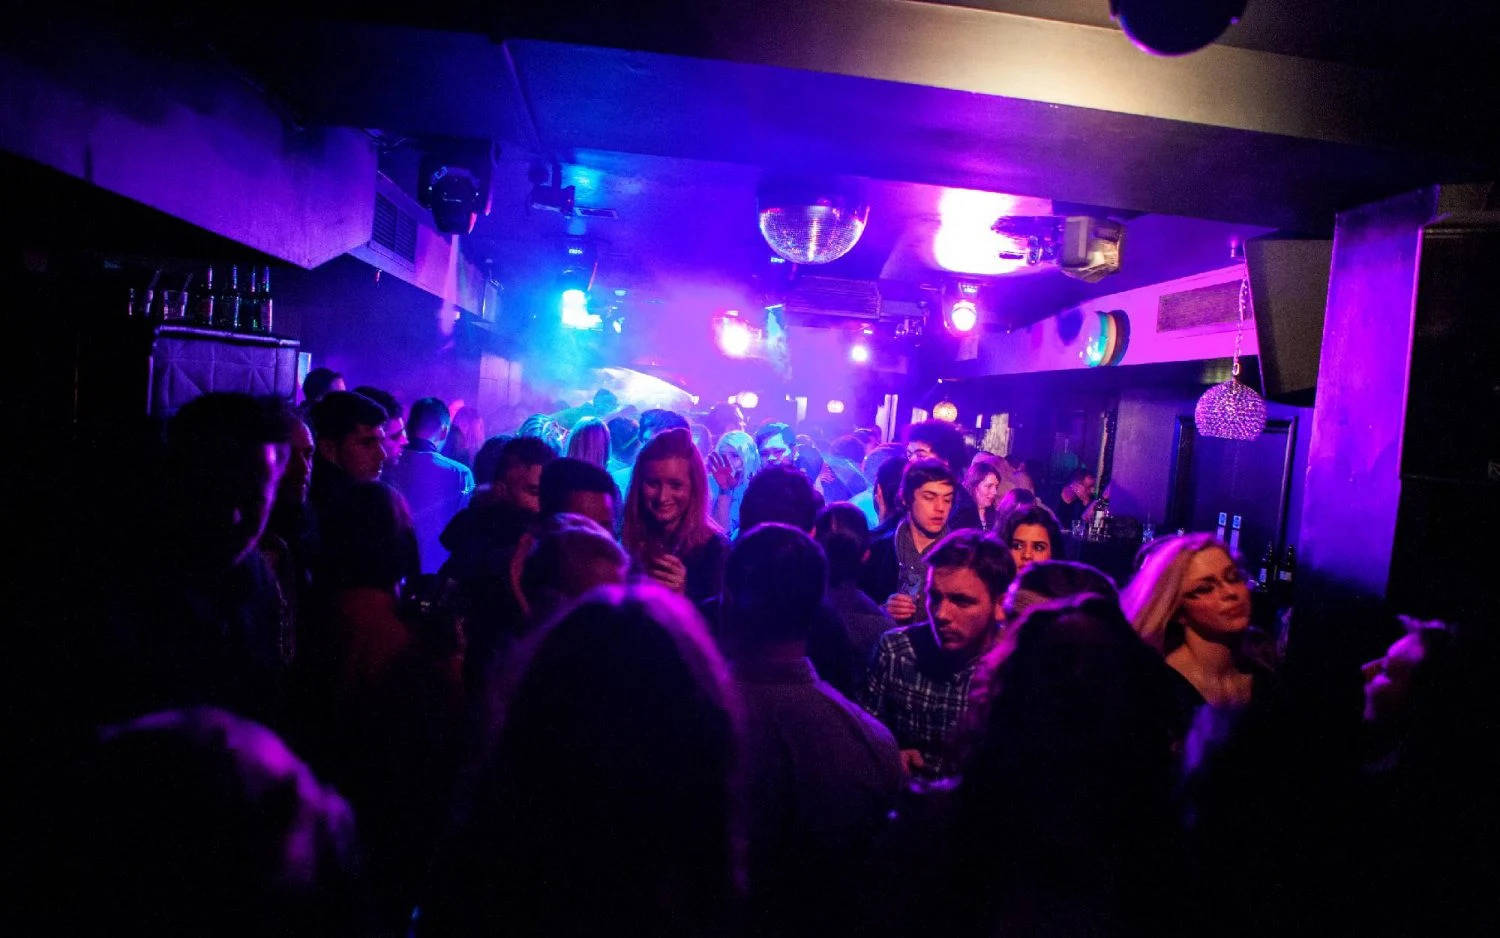 8 Exciting Nightlife Hotspots In London